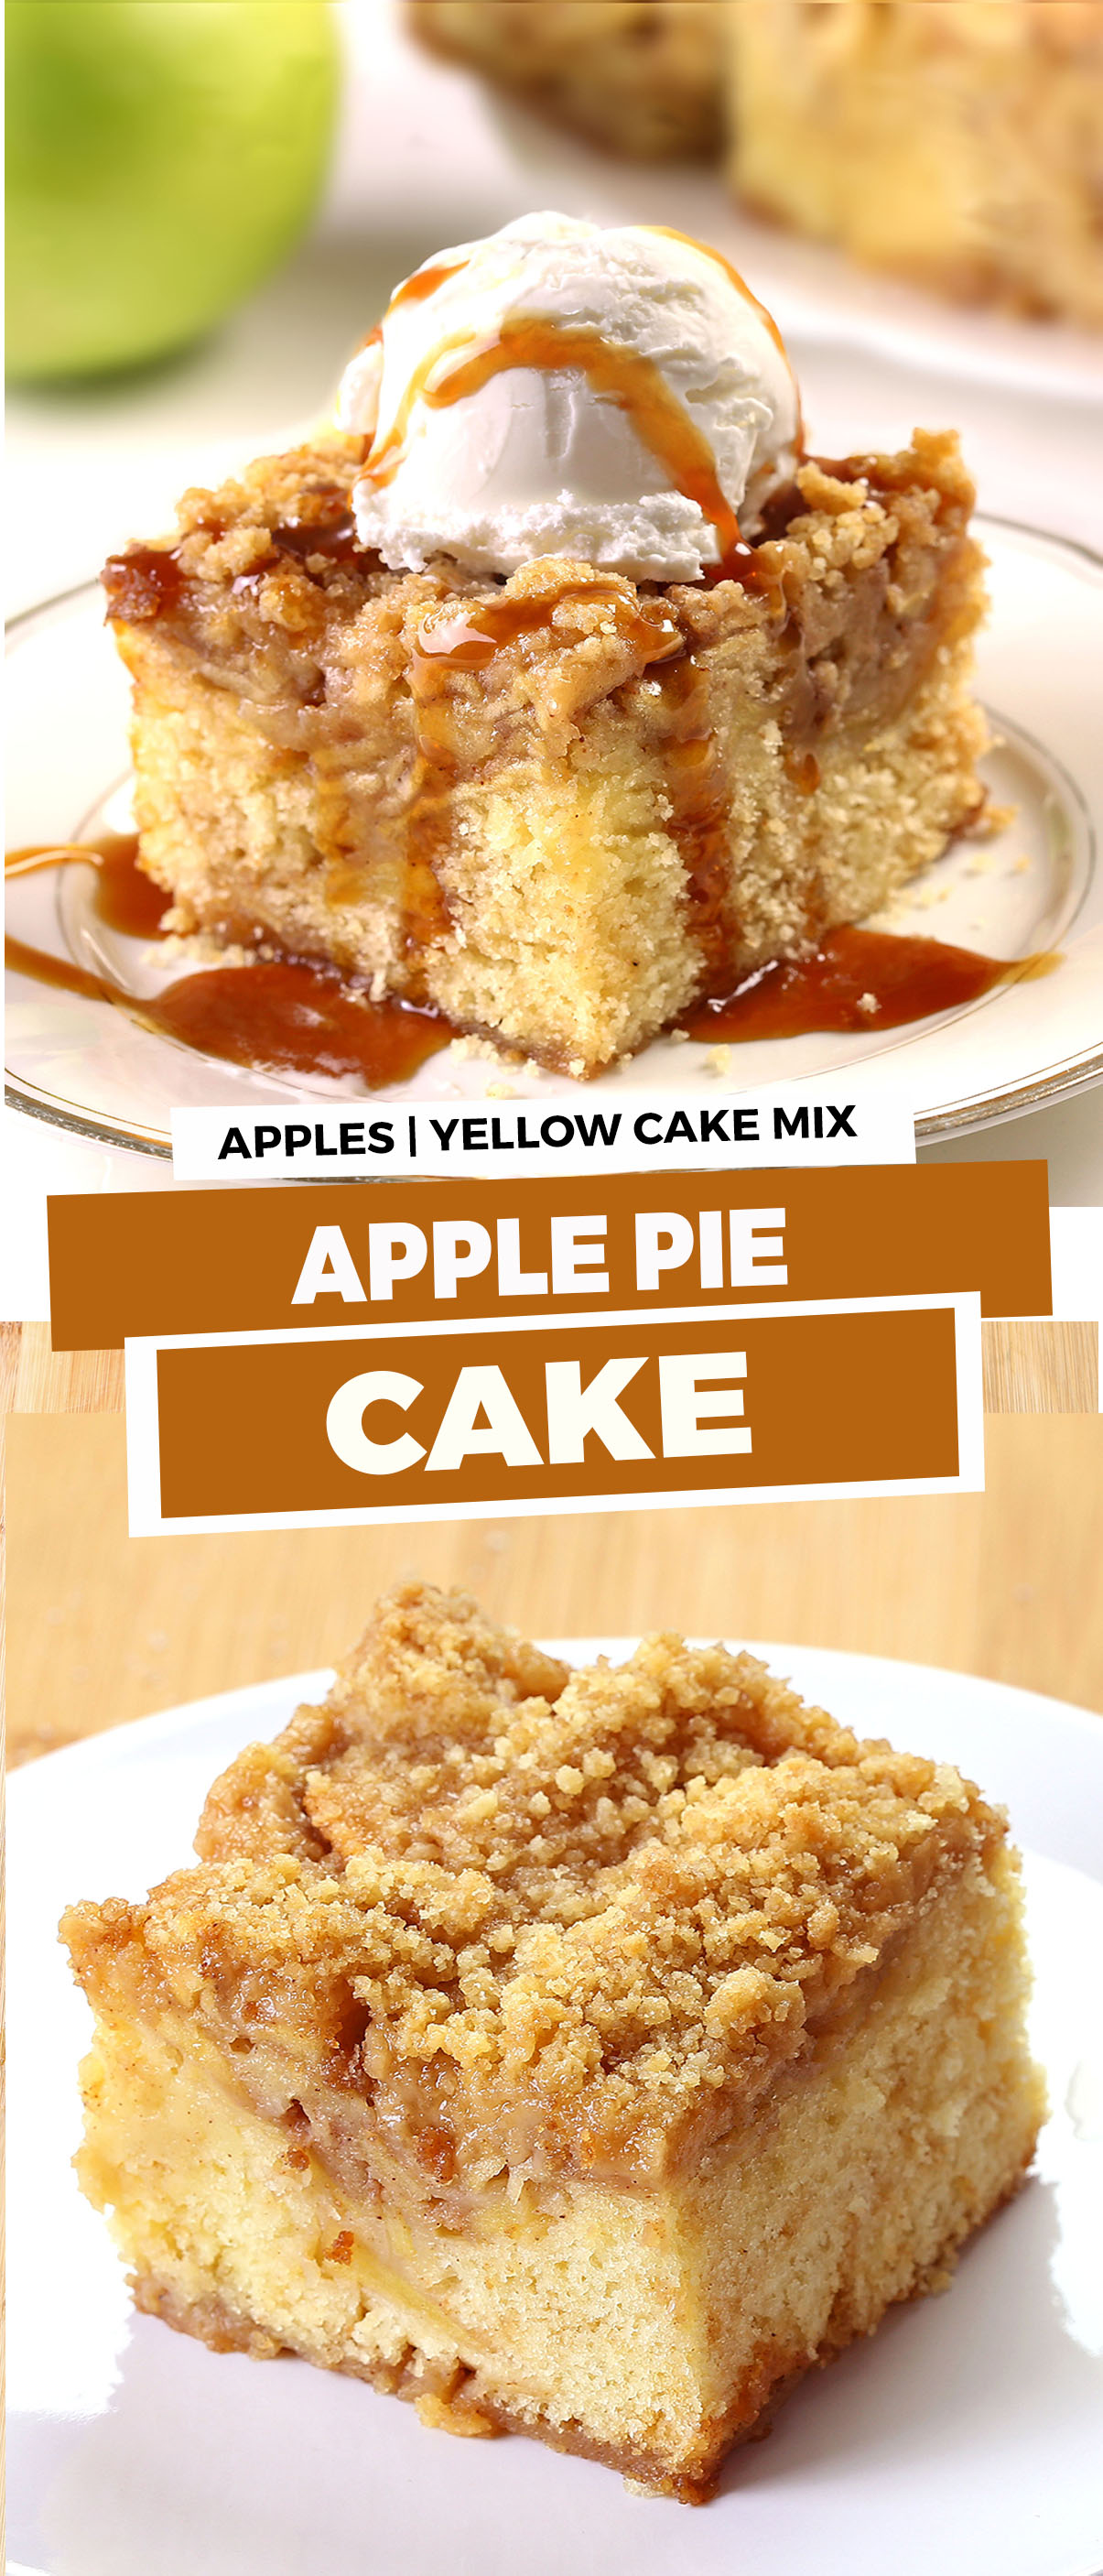 Pie or cake? Why choose? Apple Pie Cake tastes just like the apple pie you know and love. With fresh apples, soft cake, buttery topping and served with vanilla ice cream is over the top!